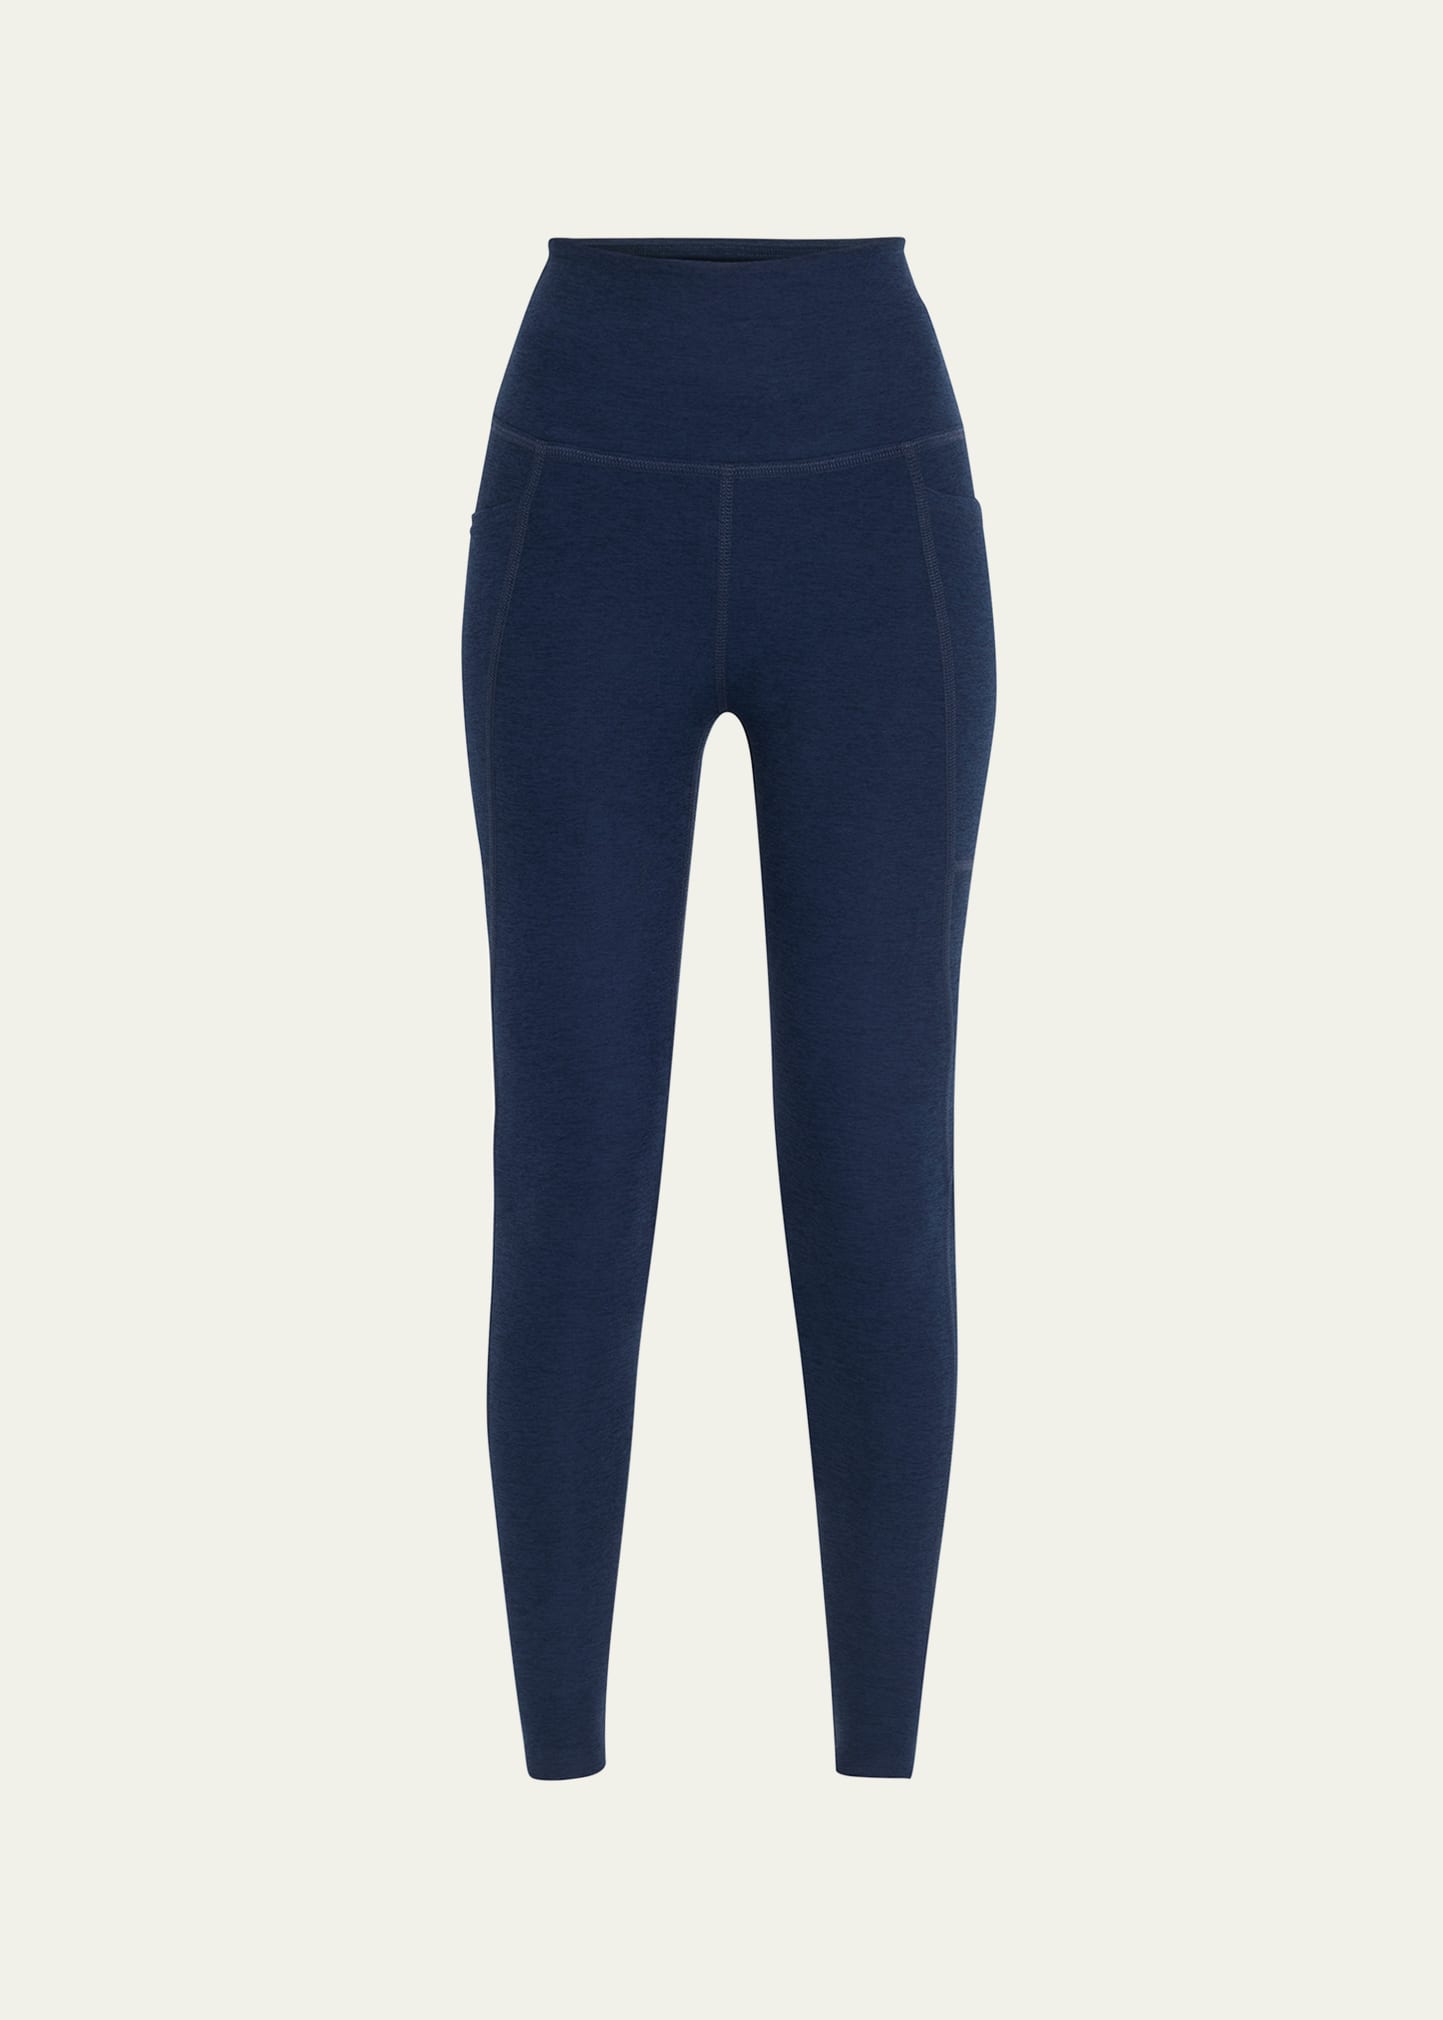 Out Of Pocket Space Dye High-Waist Mid Leggings